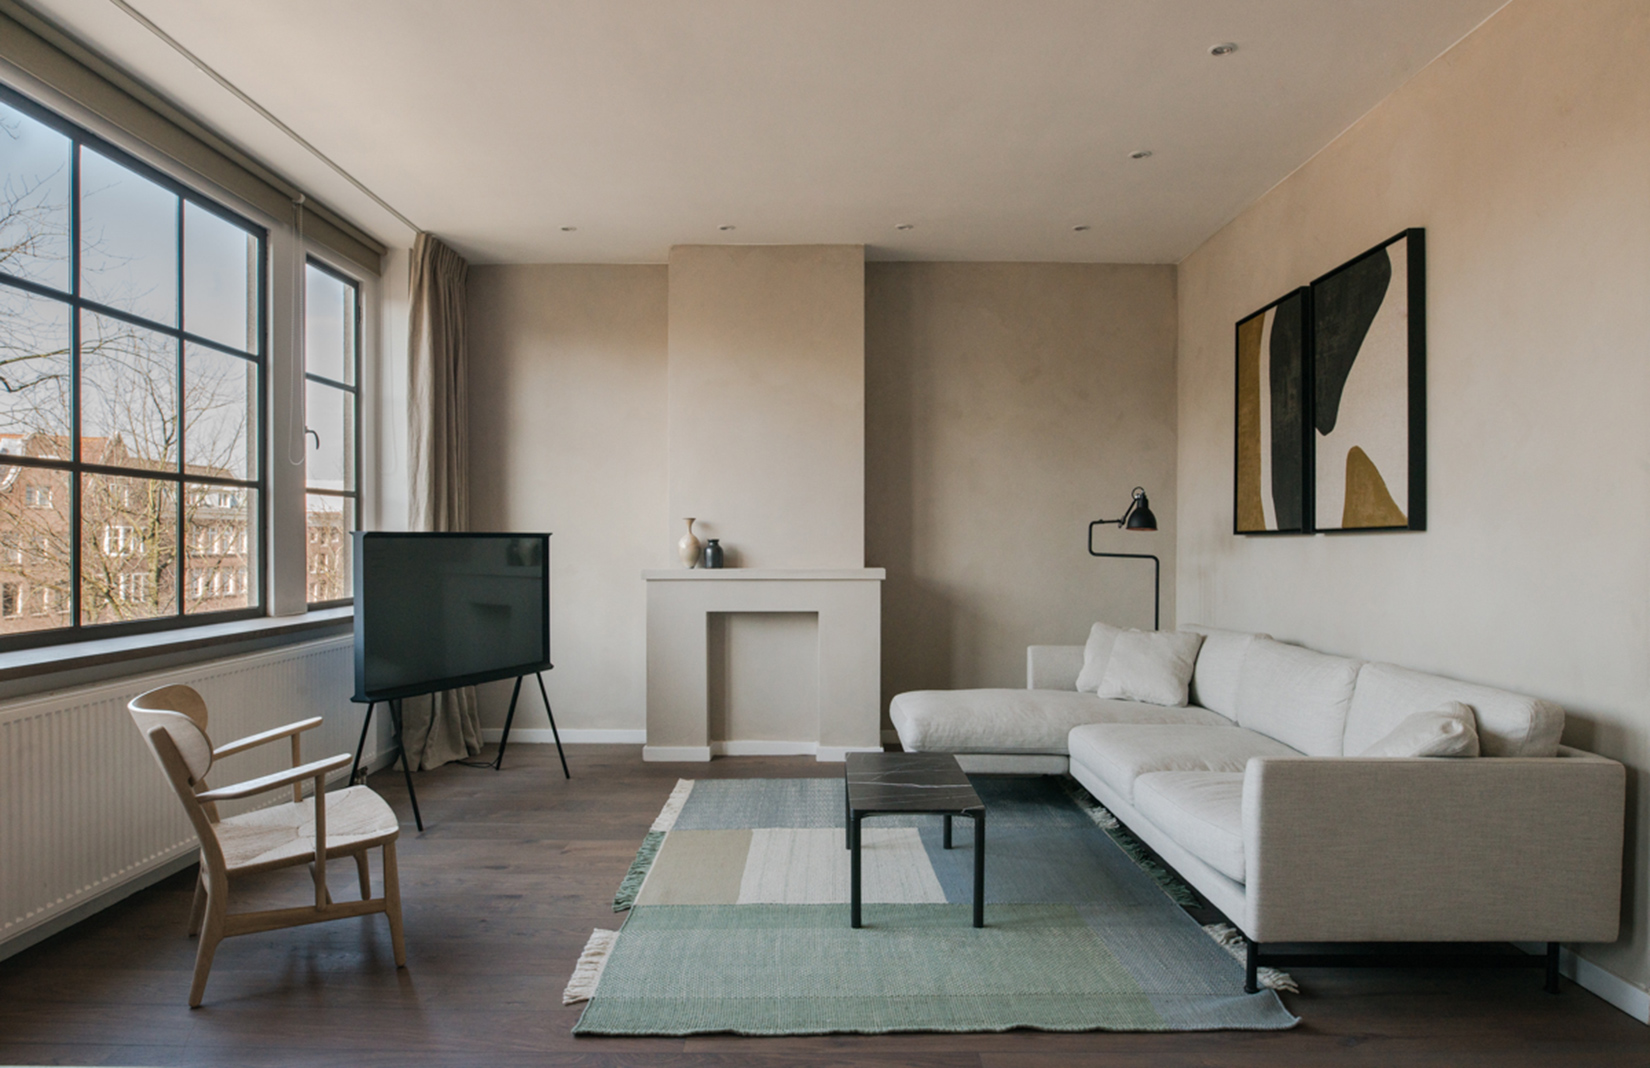 The Nieuw’s Amsterdam apartment is a liveable showroom